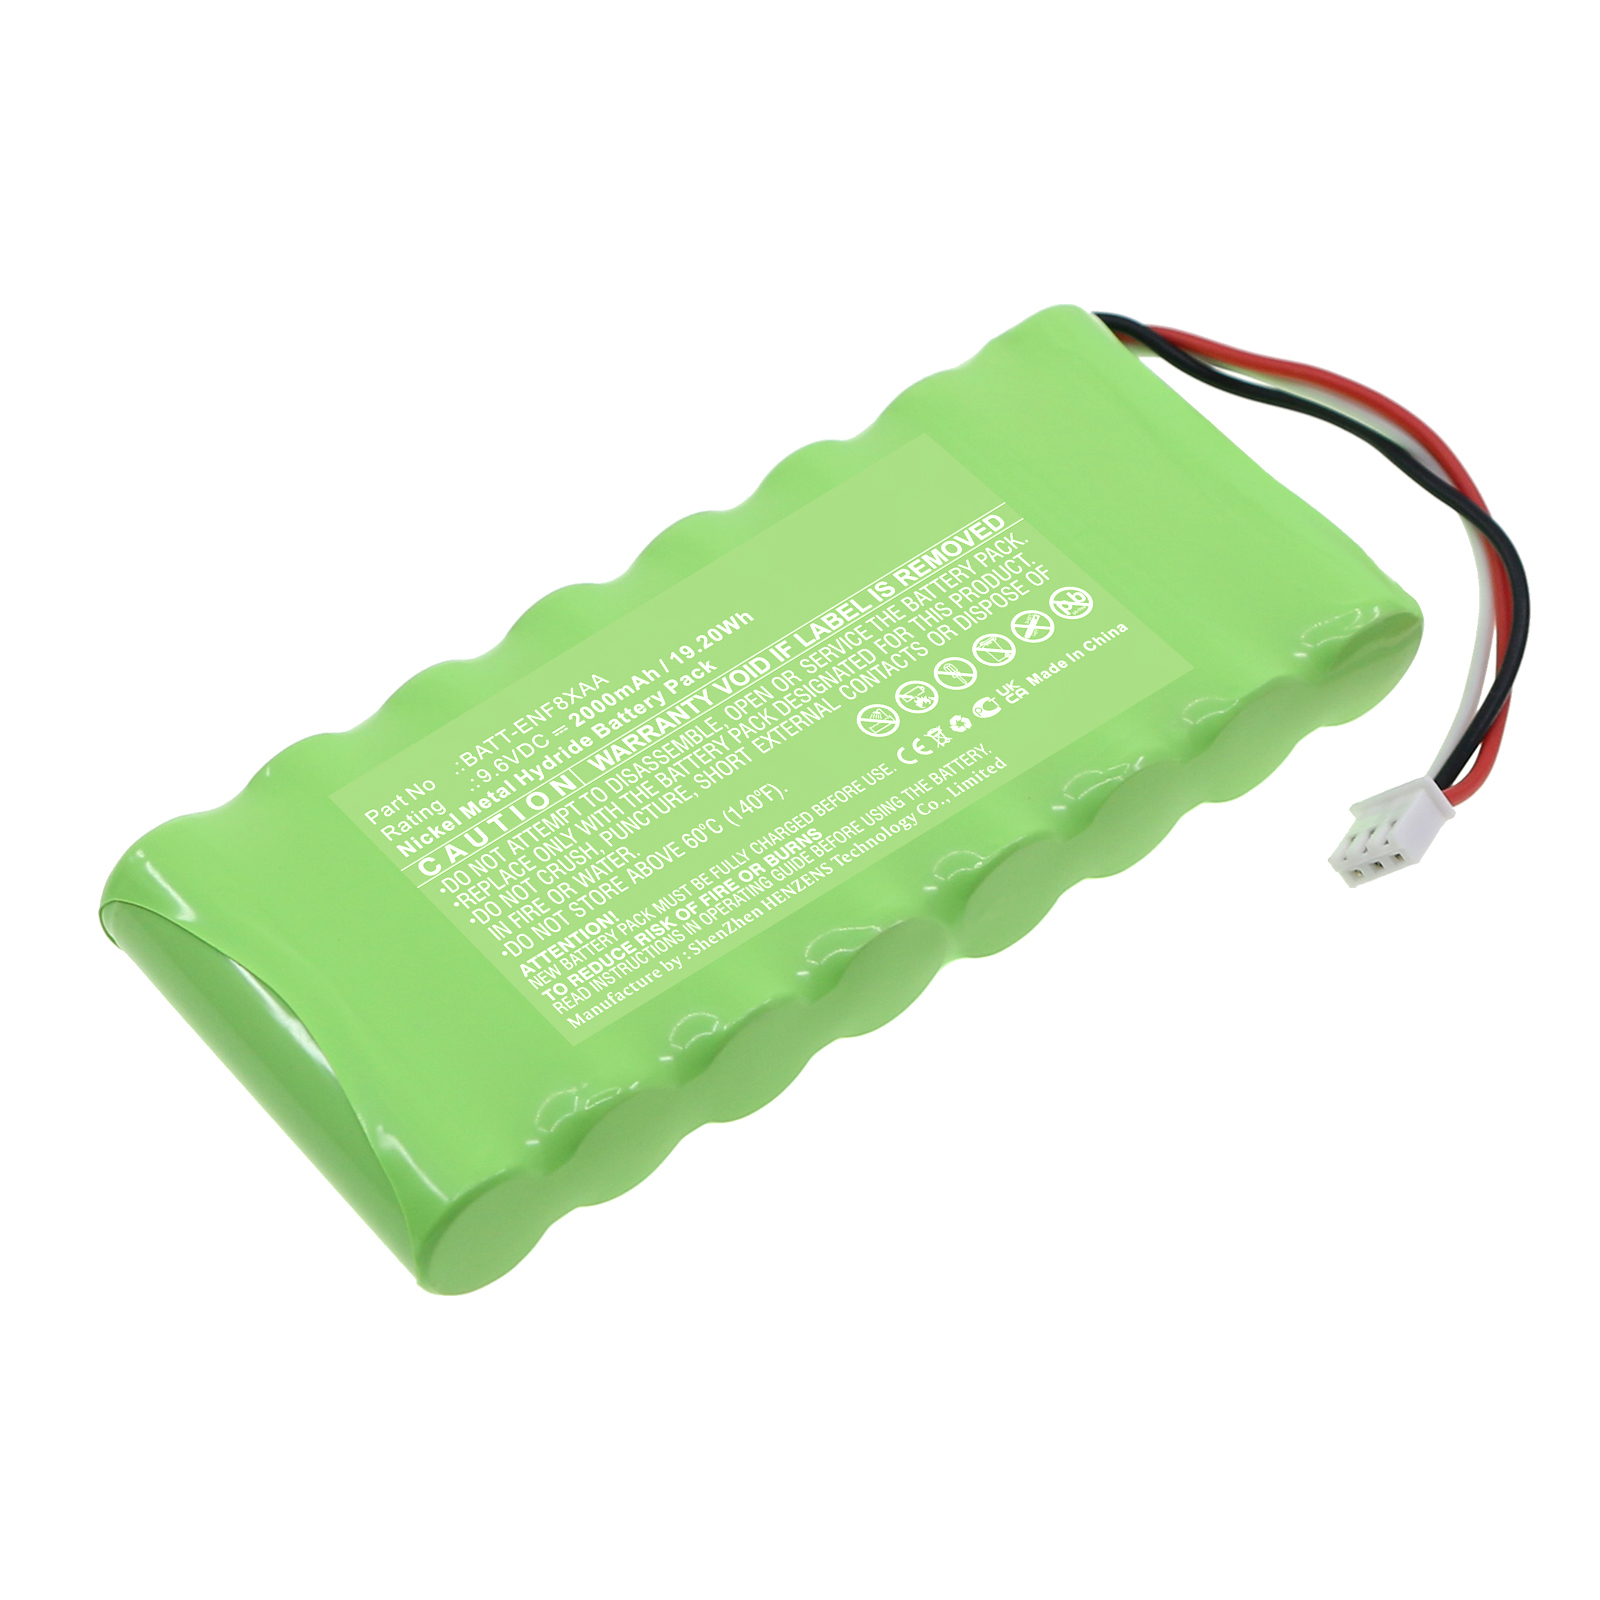 Batteries for PyronixAlarm System